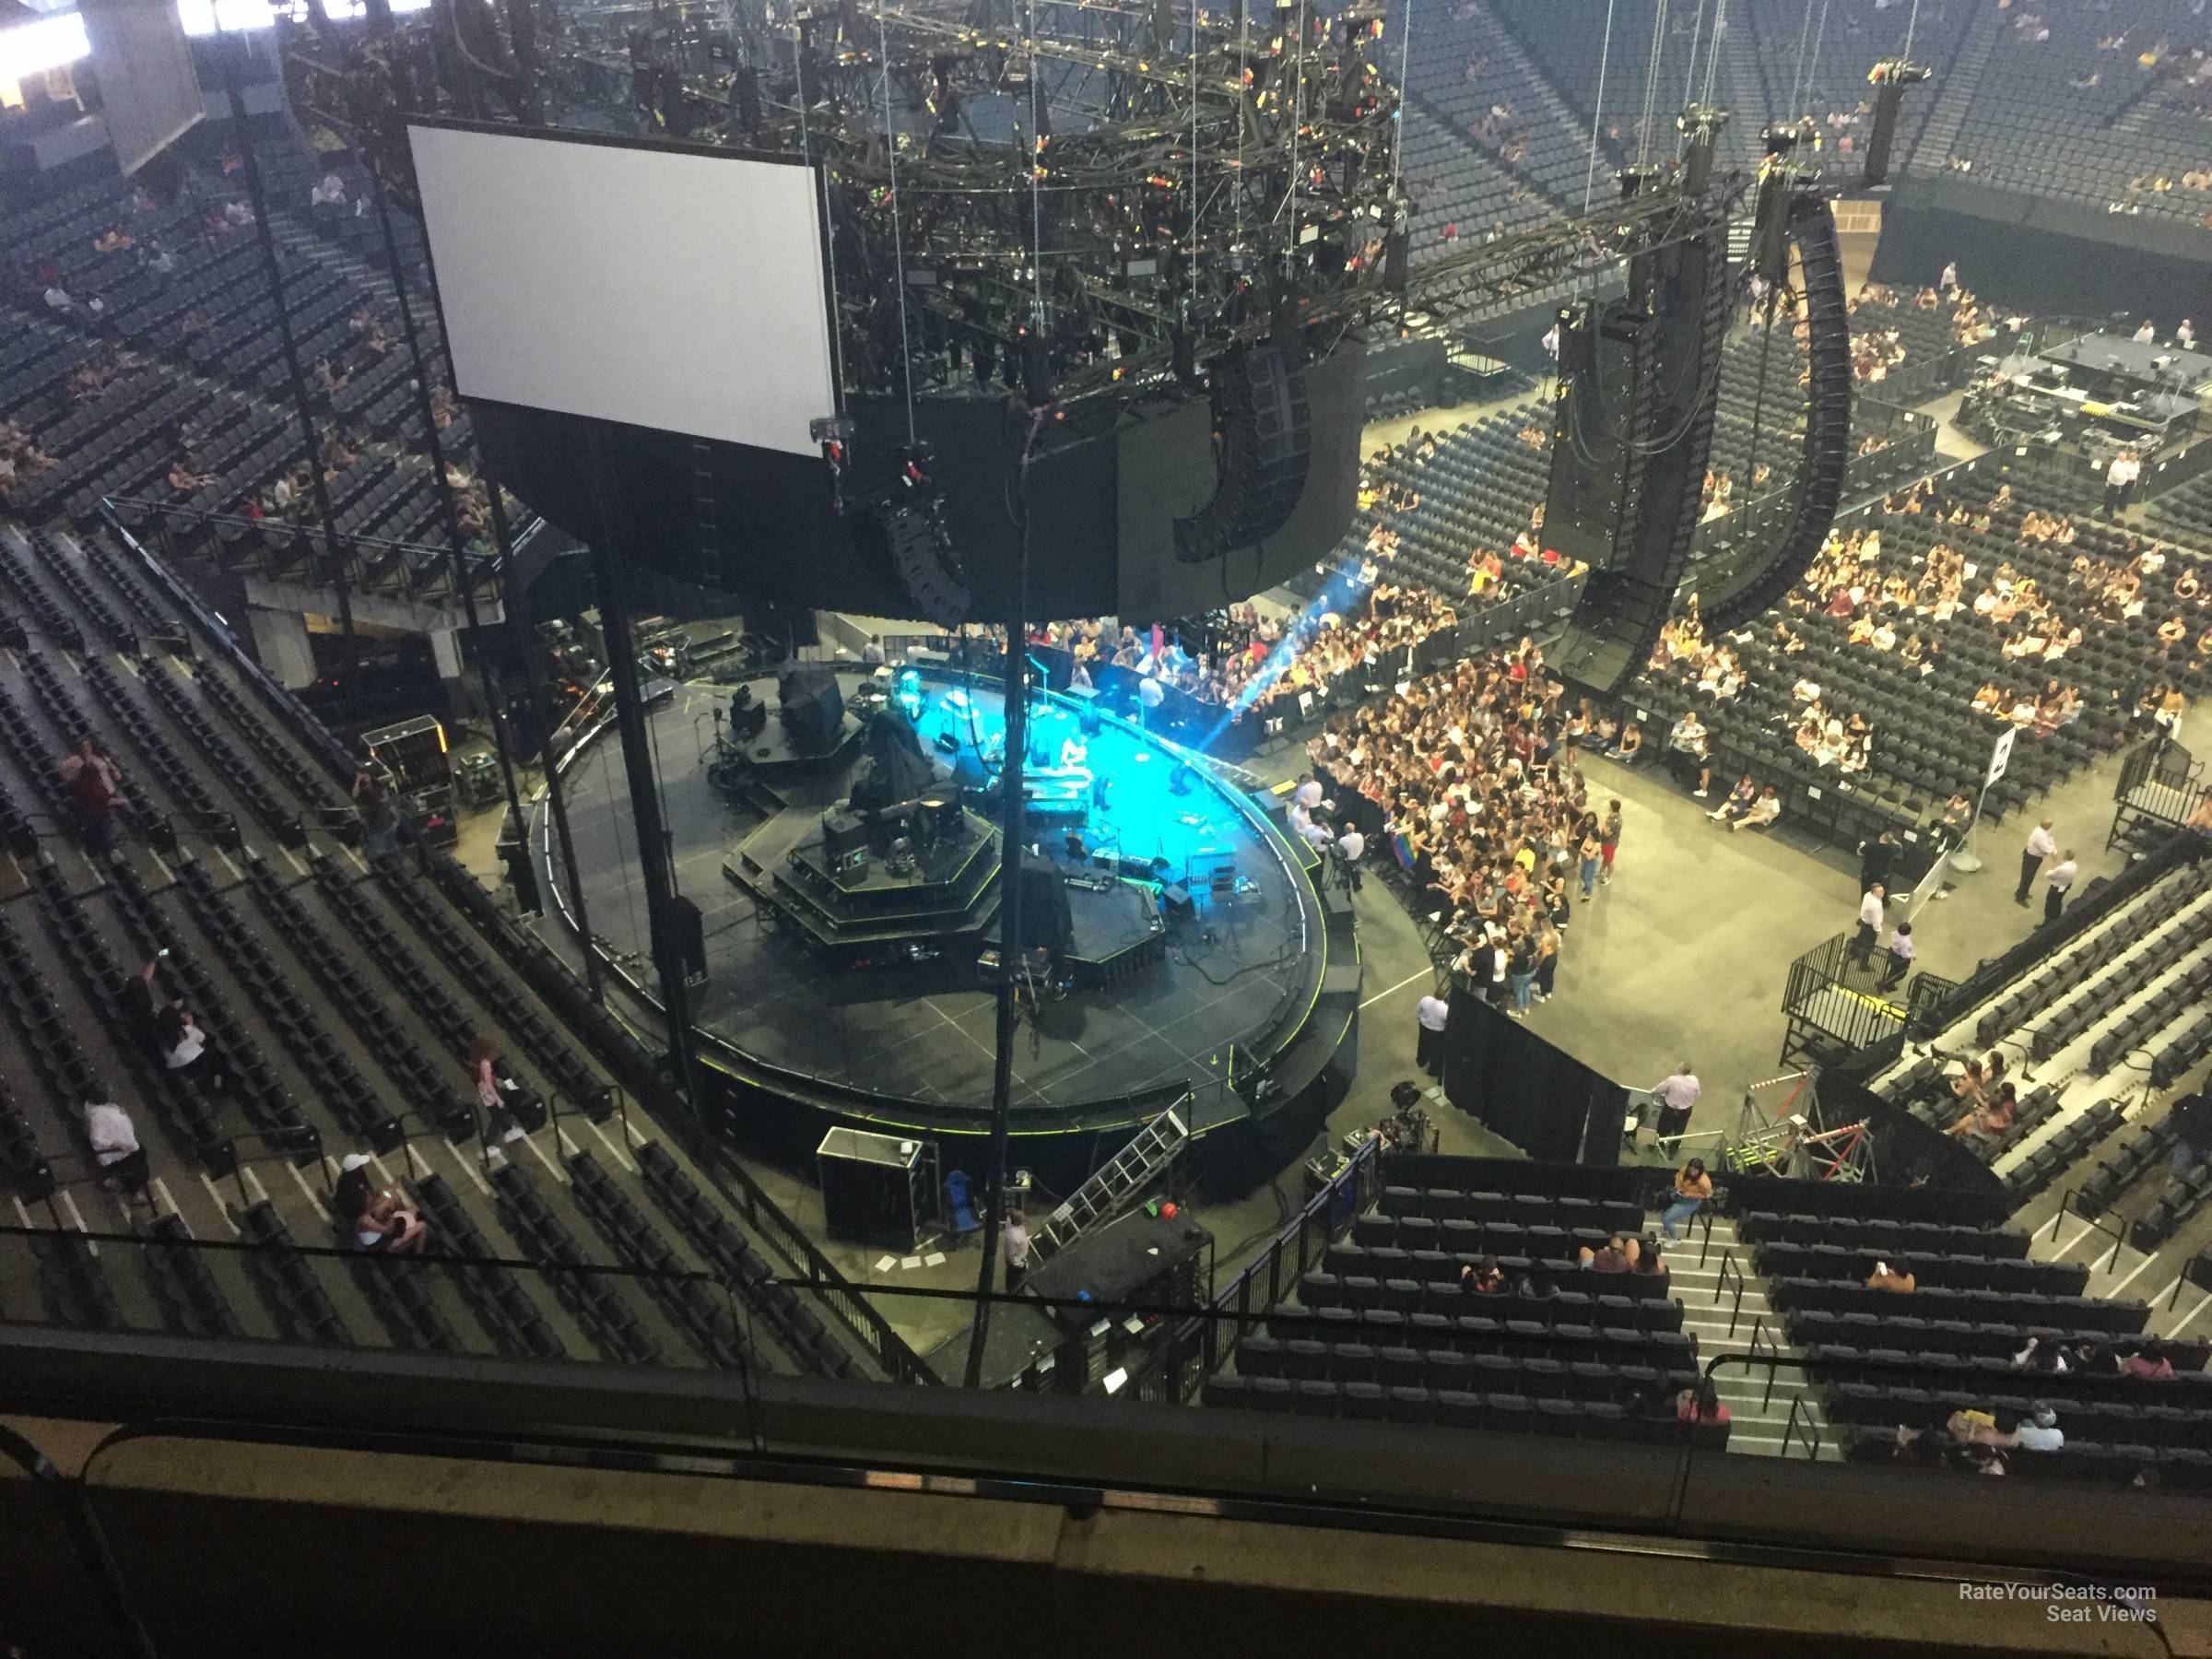 Section 222 at Golden 1 Center for Concerts